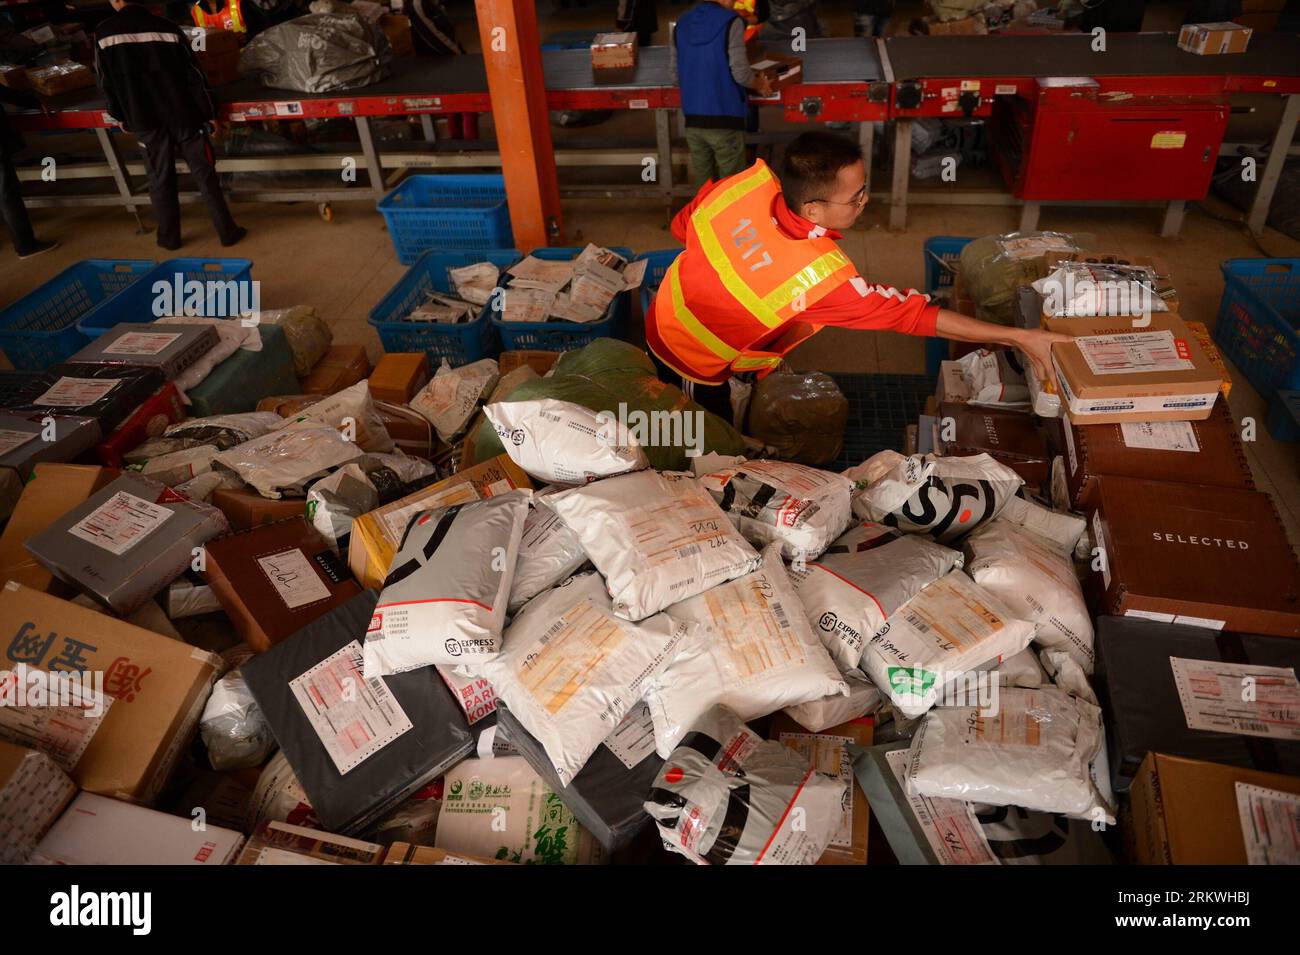 Bildnummer: 58691495  Datum: 12.11.2012  Copyright: imago/Xinhua (121112) -- NANCHANG, Nov. 12, 2012 (Xinhua) -- A worker sorts out piled-up packages at an express delivery company s sorting center in Nanchang, capital of east China s Jiangxi Province, Nov. 12, 2012. The Chinese grassroots self-proclaimed Singles Day, which falls on November 11, has become a shopping festival under a continuous sales promotion of e-business groups. Great discounts resulted in a sharp increase of online trades which cause enormous pressure on express service.(Xinhua/Zhou Mi) (wjq) CHINA-JIANGXI-SINGLE S DAY-EXP Stock Photo